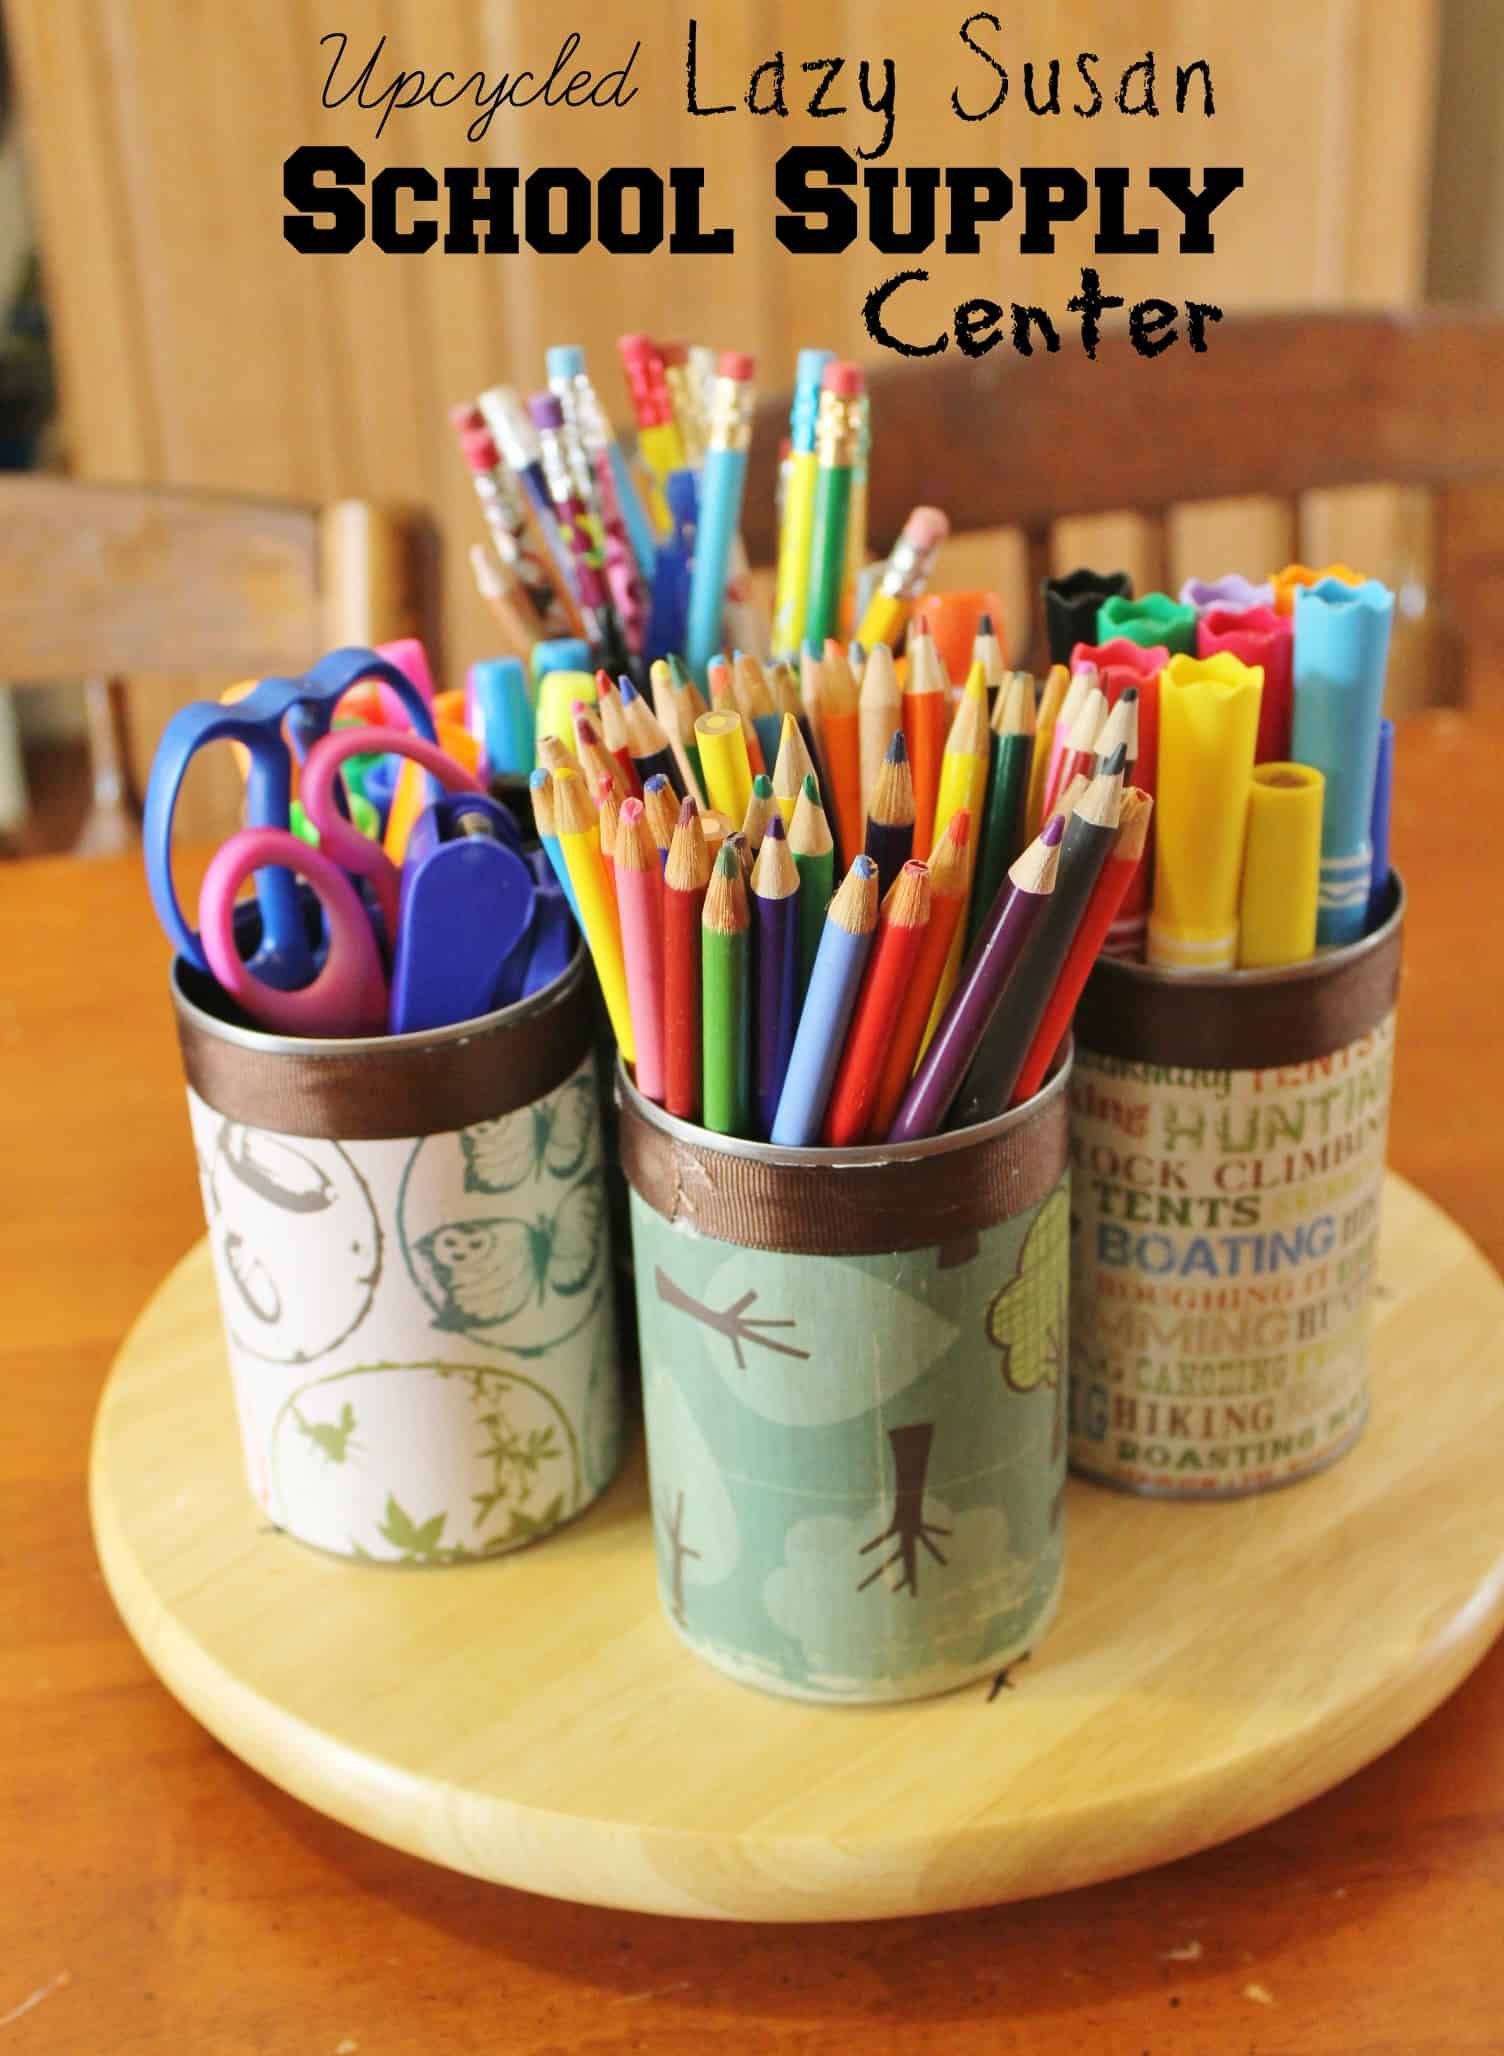 Upcycled Lazy Susan School Supply Center - GREAT Teacher Gift